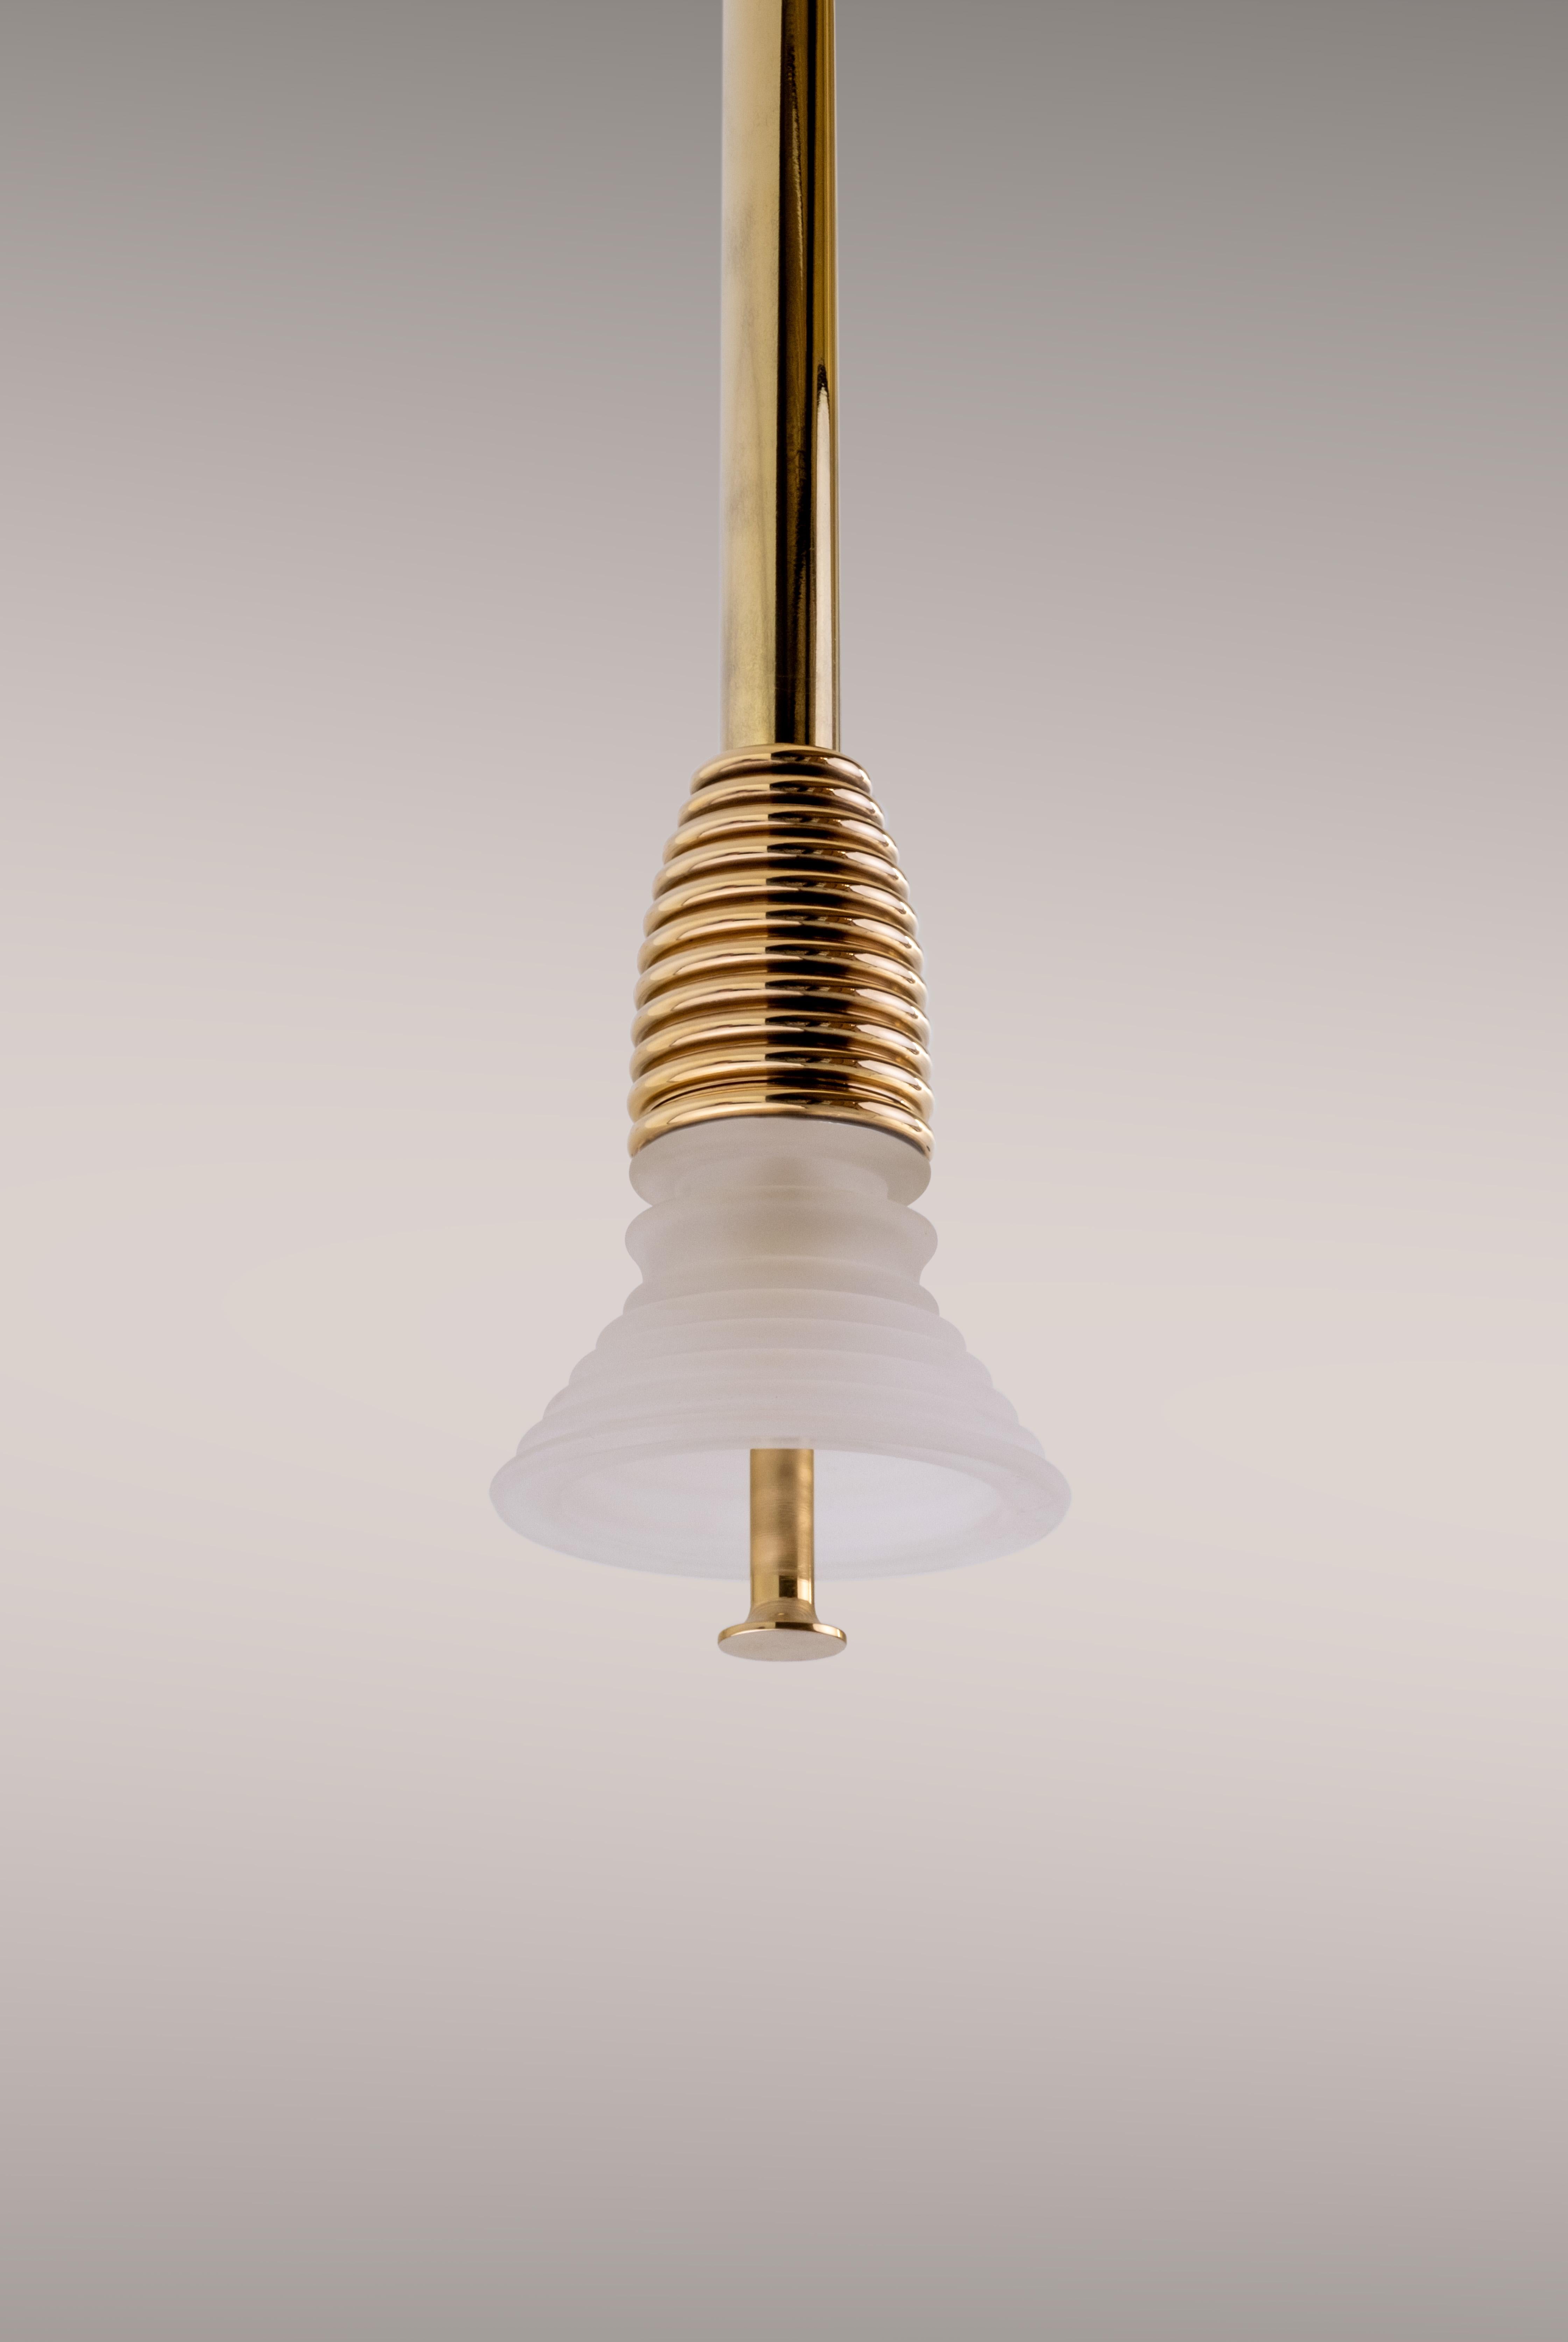 British The Insulator 'A' Pendant in polished brass and clear glass by NOVOCASTRIAN deco For Sale